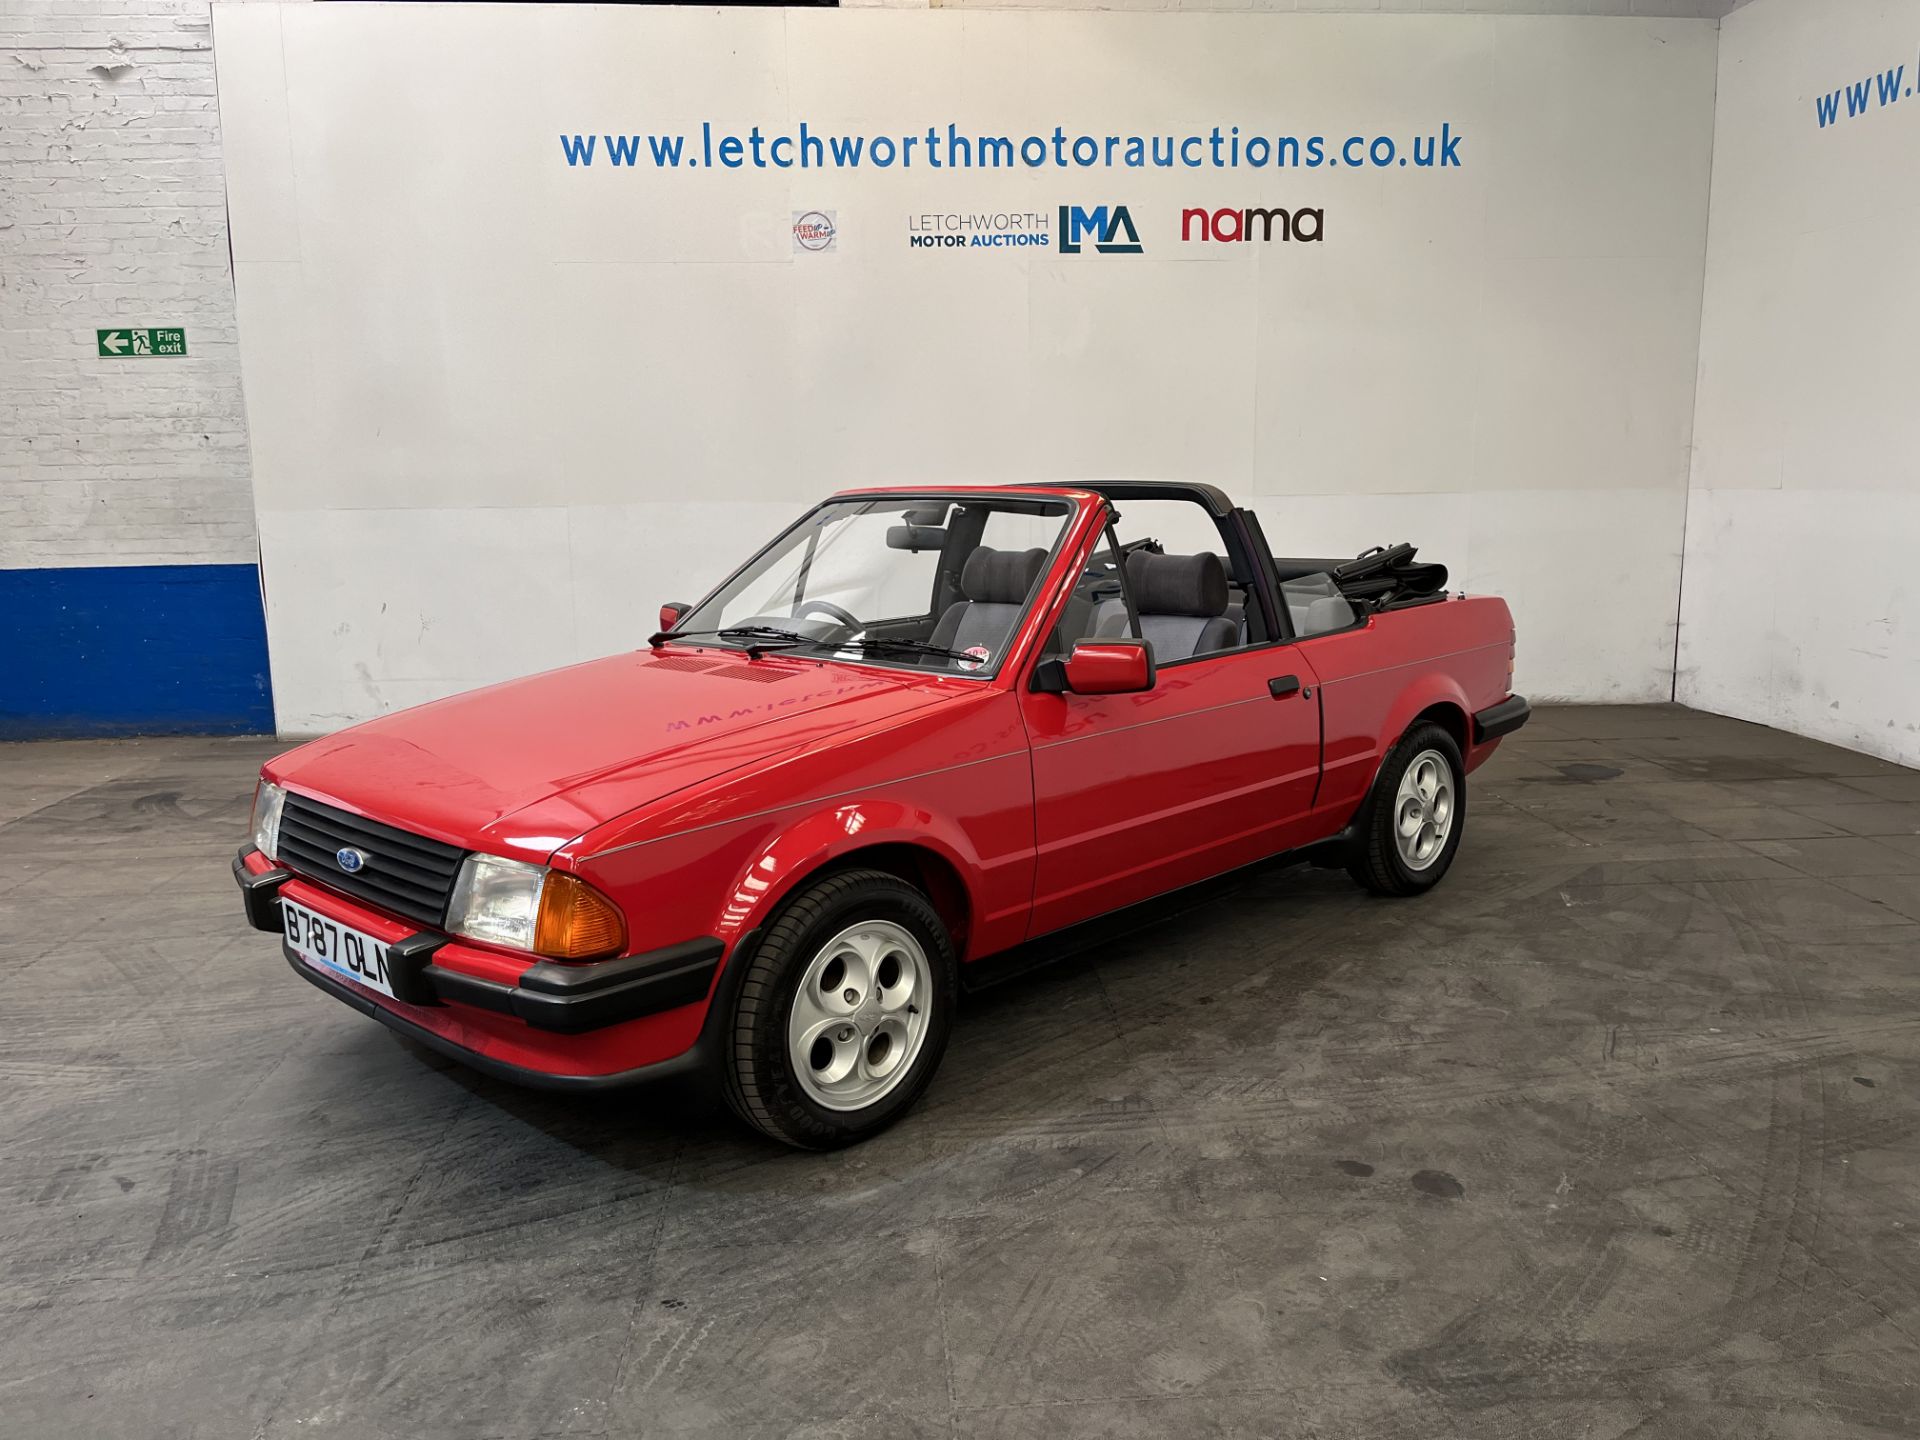 1985 Ford Escort 1.6i Cabriolet - 1597cc *ONE OWNER FROM NEW* - Image 6 of 24